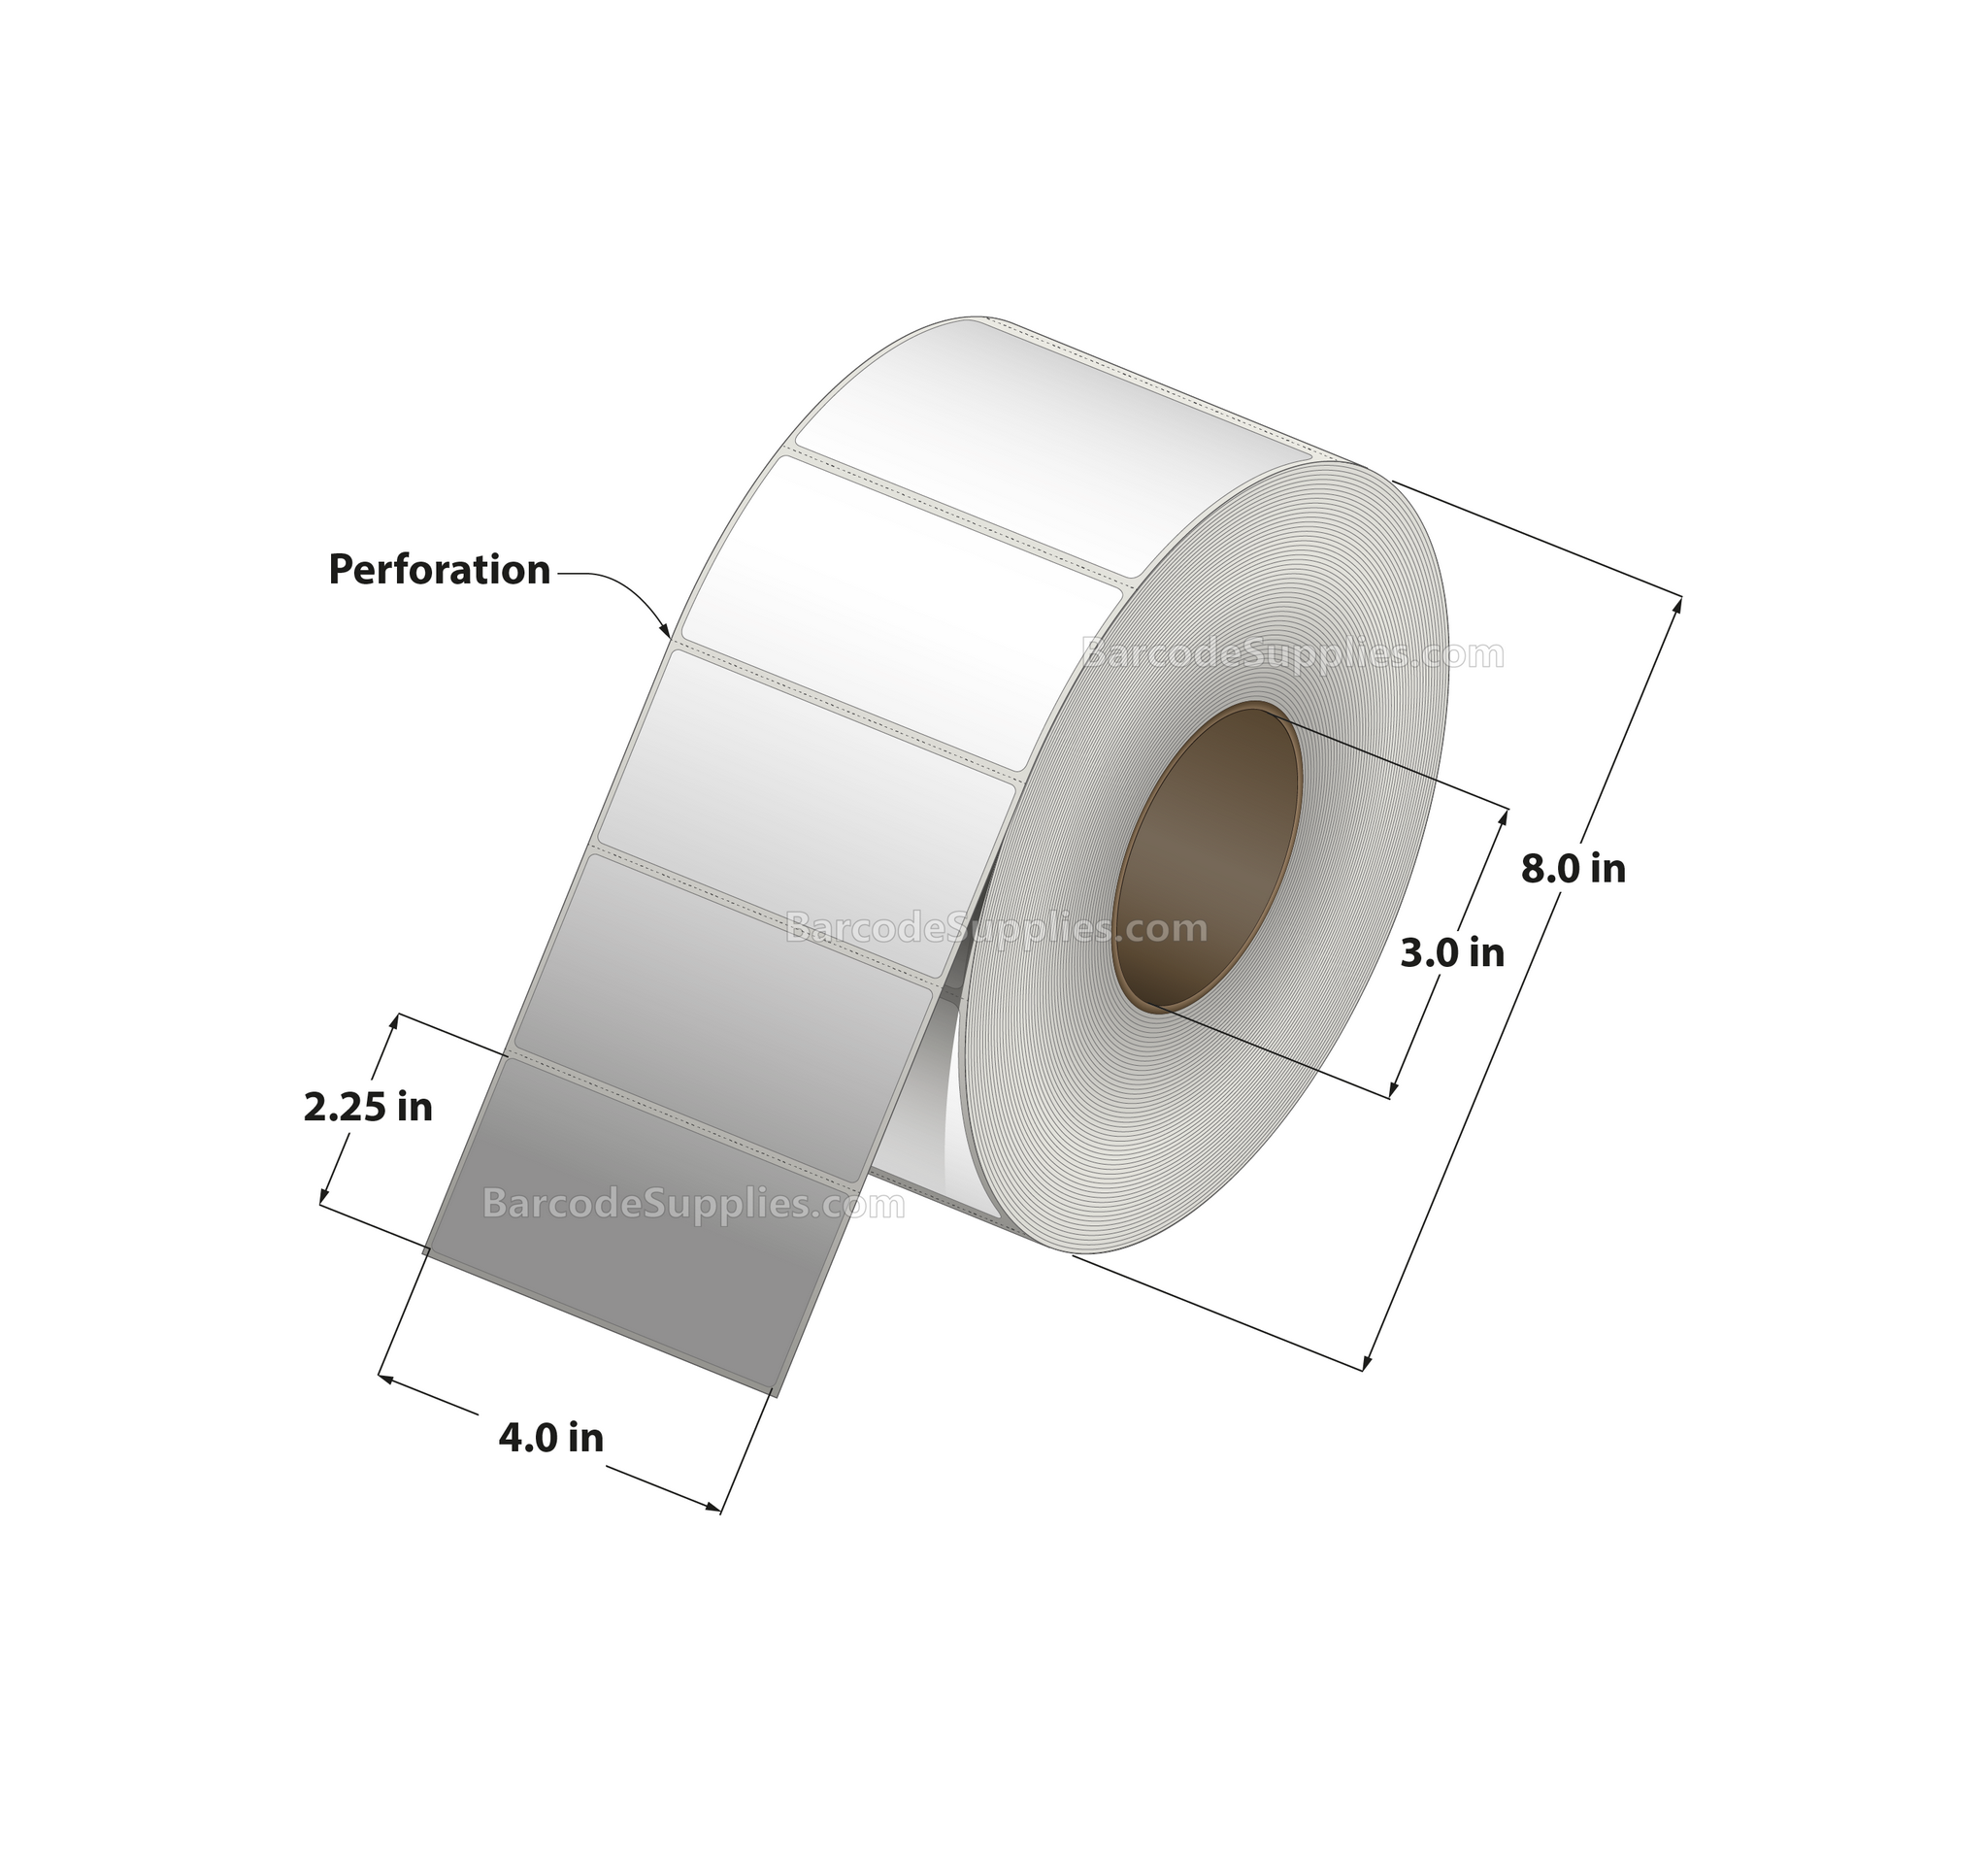 4 x 2.25 Thermal Transfer White Labels With Permanent Adhesive - Perforated - 2575 Labels Per Roll - Carton Of 4 Rolls - 10300 Labels Total - MPN: RT-4-225-2575-3